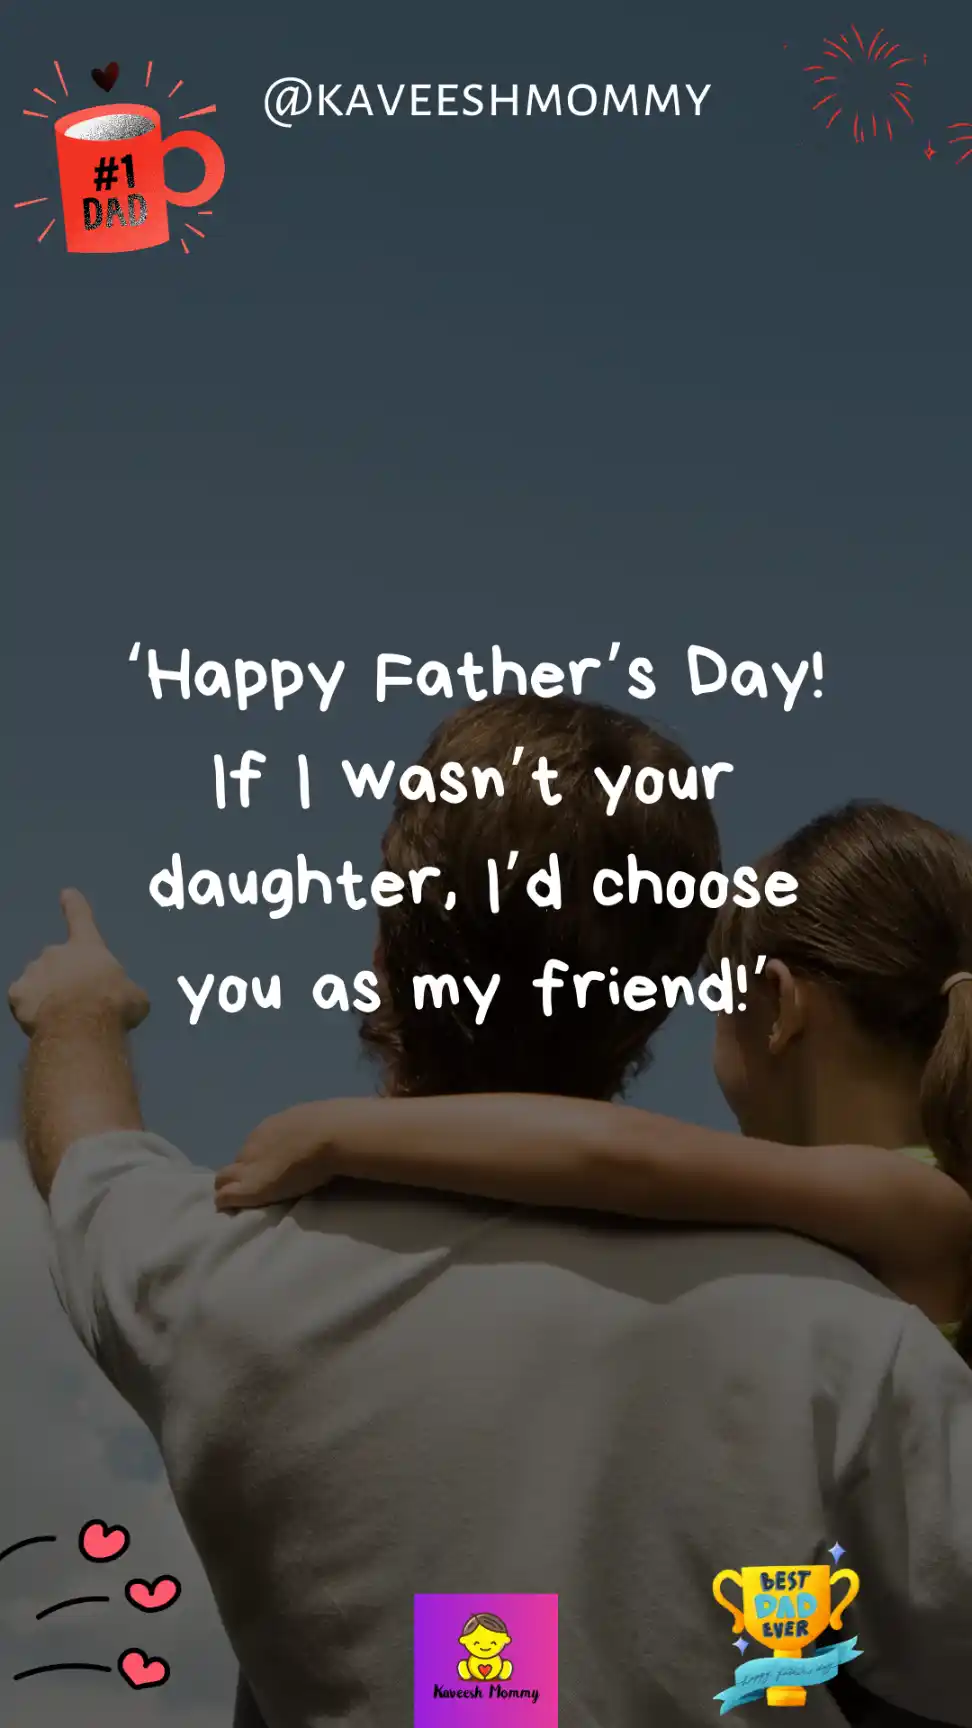 happy father's day from daughter-‘Happy Father’s Day! If I wasn’t your daughter, I’d choose you as my friend!’